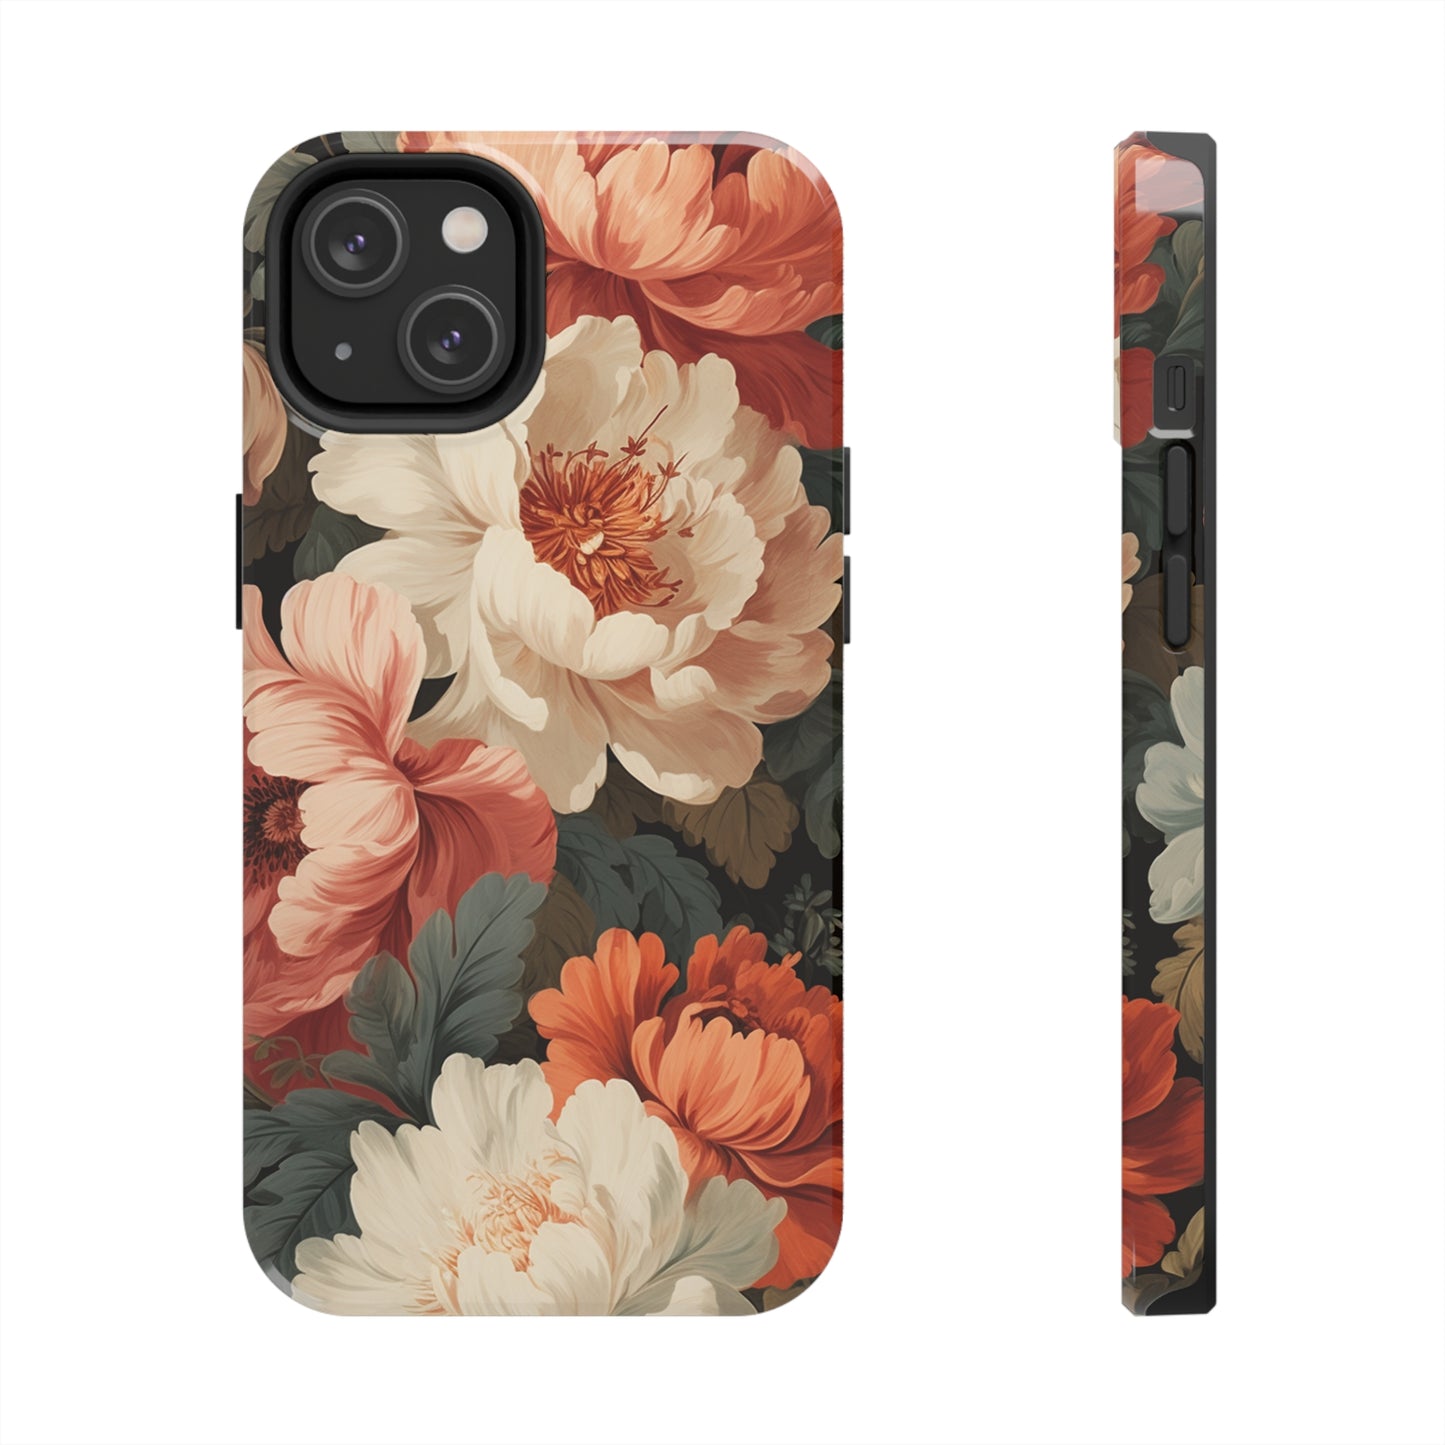 Vintage Floral Aesthetic iPhone 12 Case